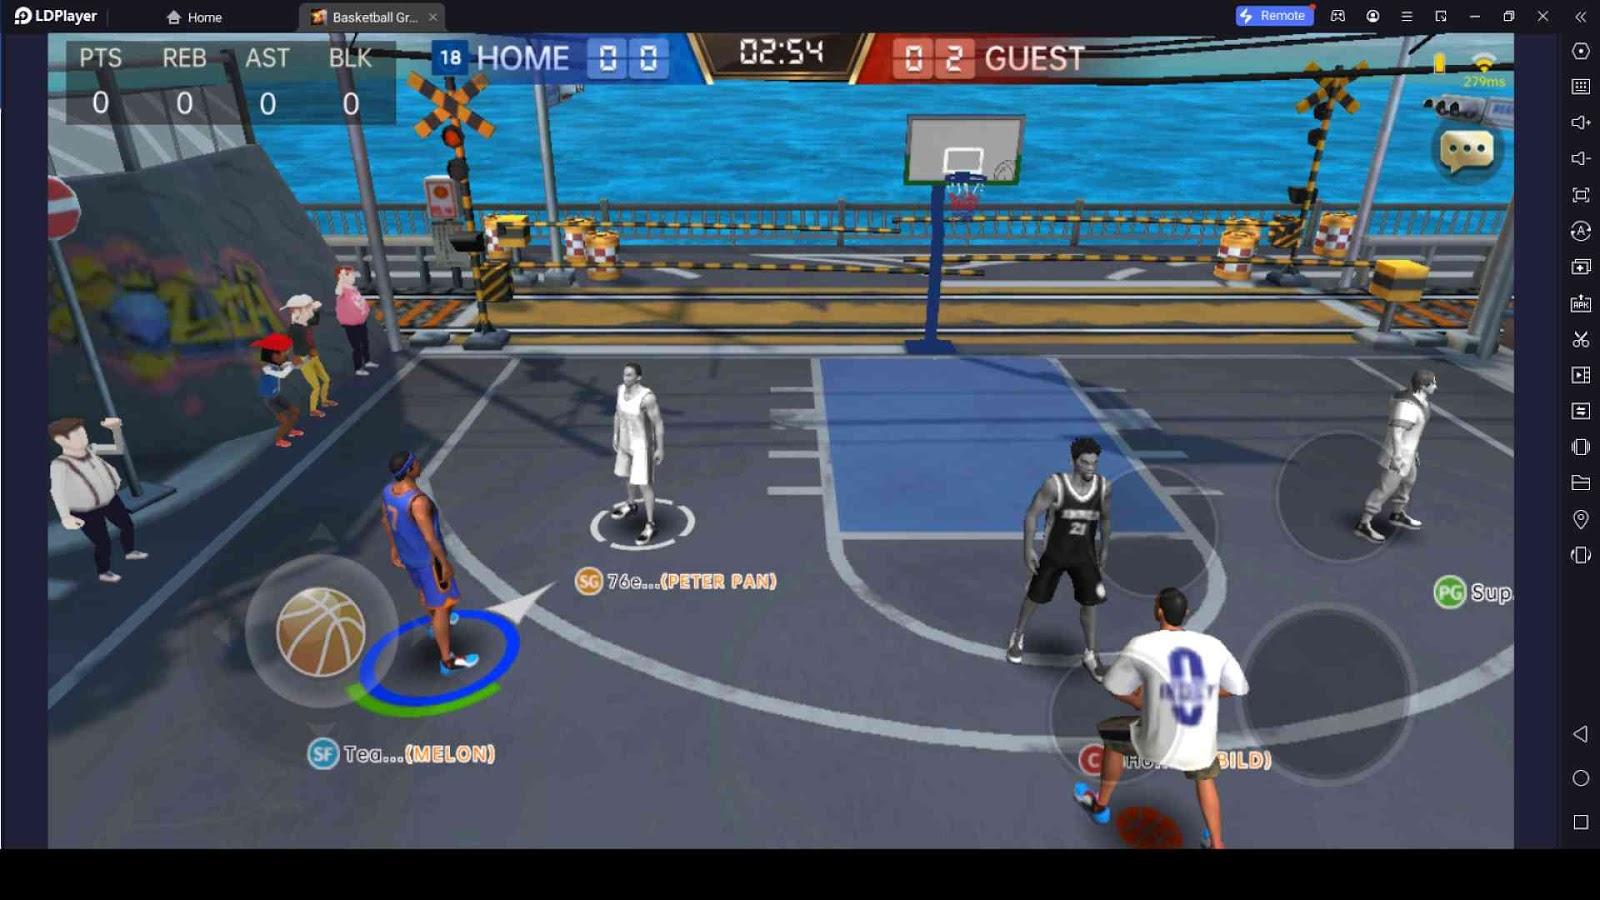 Getting Started with the Basketball Grand Slam Gameplay